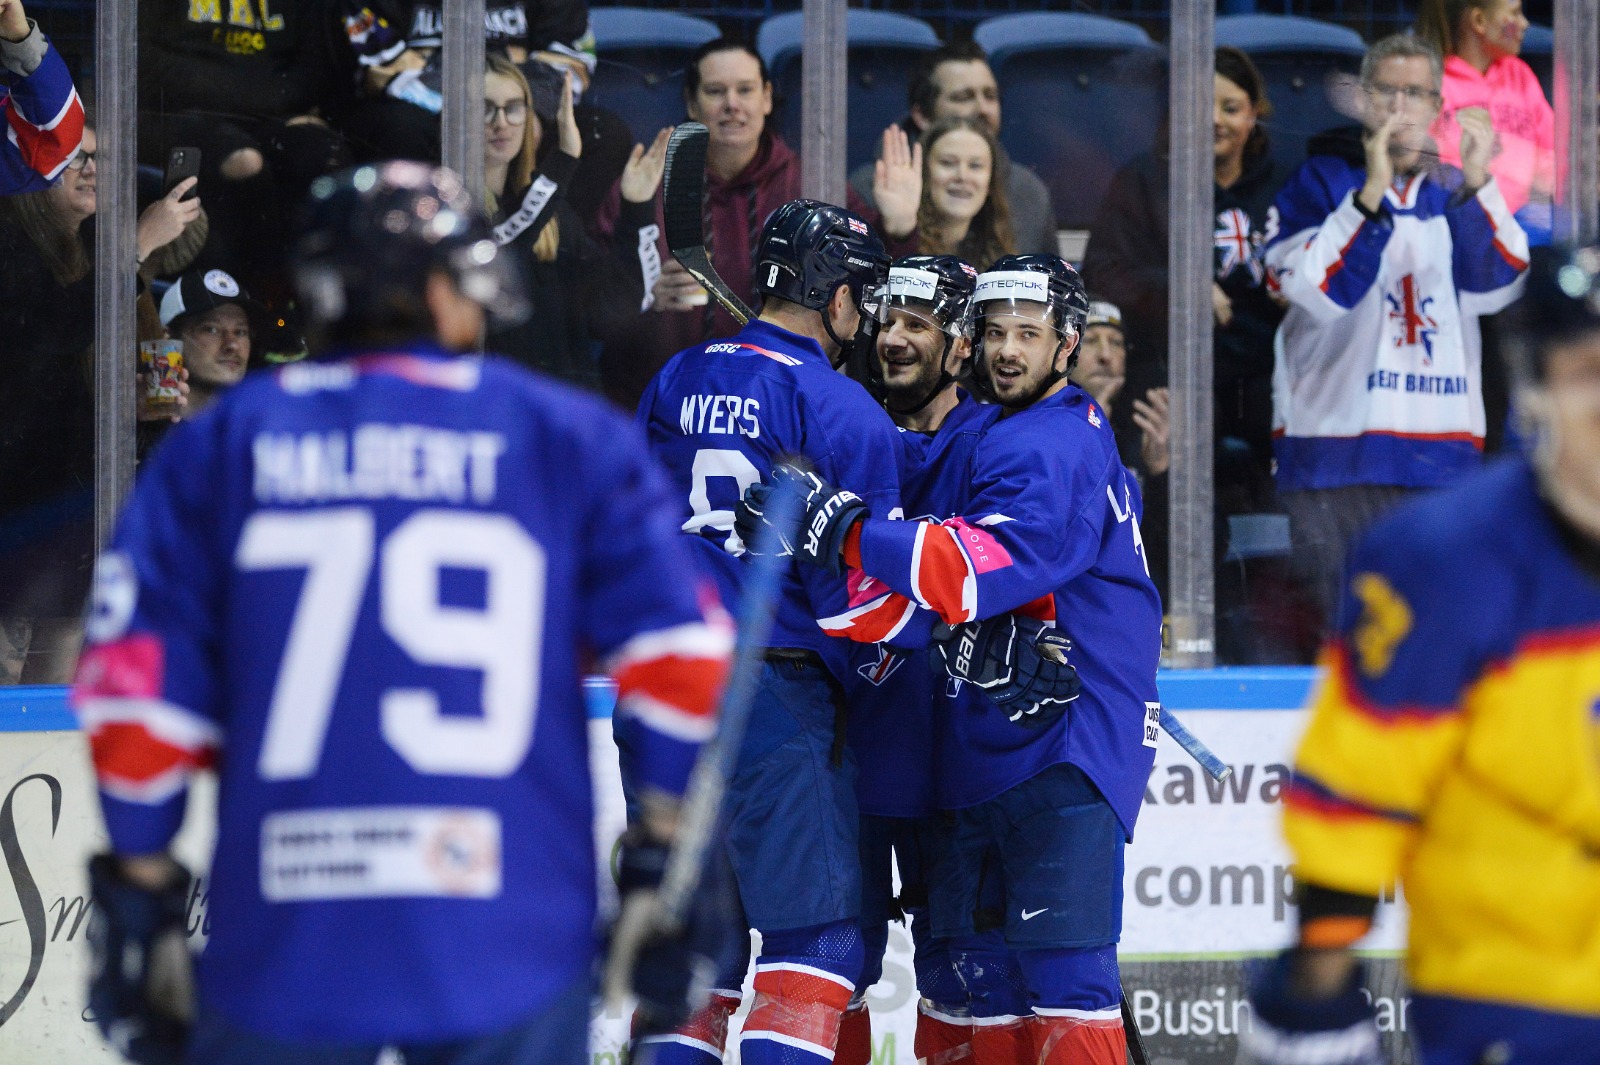 MYERS AND HAMMOND STAR IN GB VICTORY Top Image